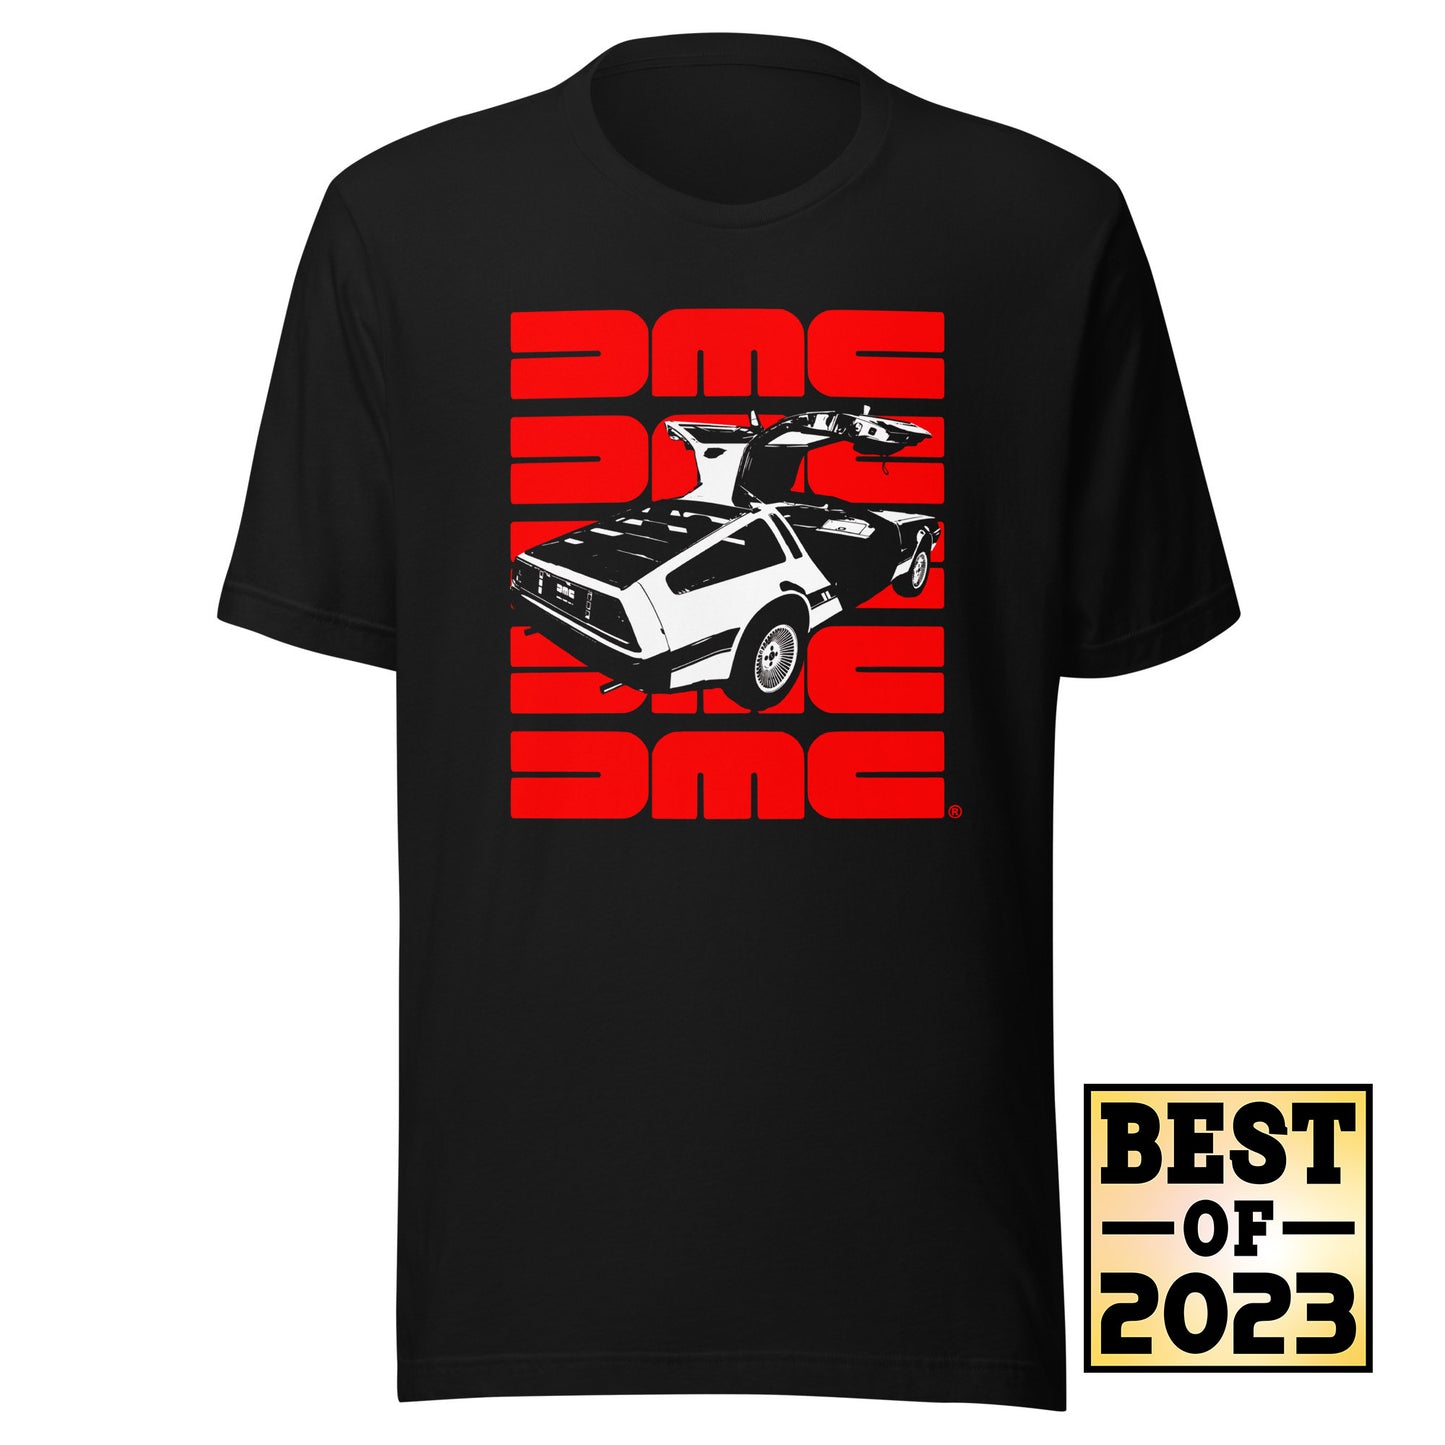 June Black, White, and Red All Over (Blackout Edition) T-shirt